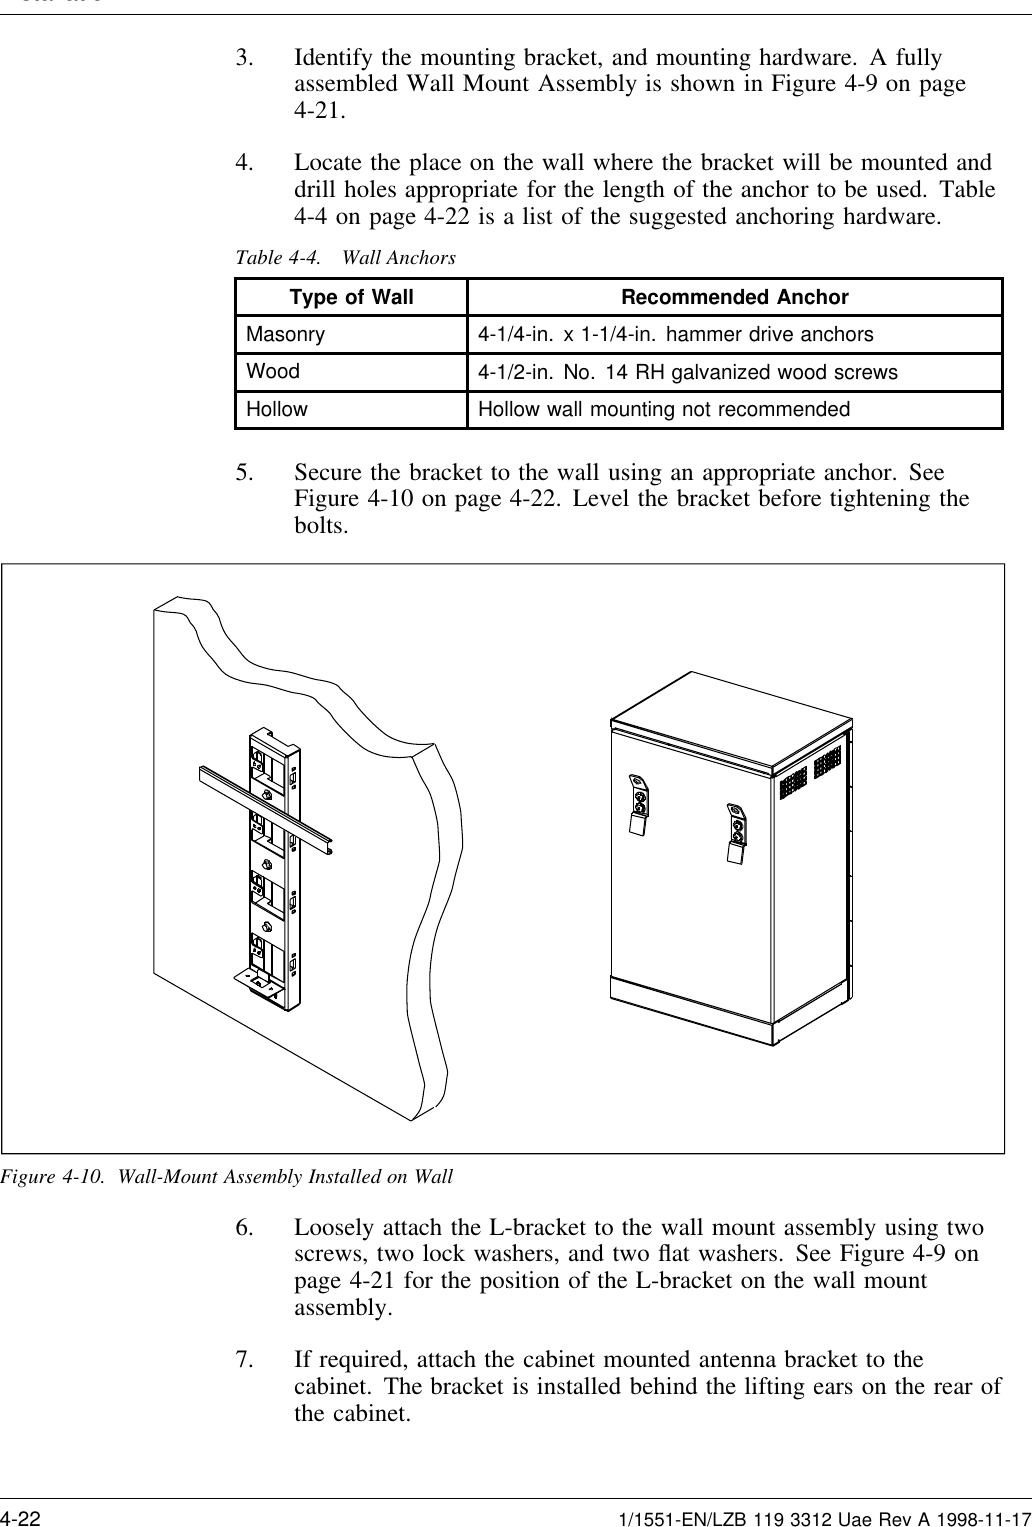 Installation3. Identify the mounting bracket, and mounting hardware. A fullyassembled Wall Mount Assembly is shown in Figure 4-9 on page4-21.4. Locate the place on the wall where the bracket will be mounted anddrill holes appropriate for the length of the anchor to be used. Table4-4 on page 4-22 is a list of the suggested anchoring hardware.Table 4-4. Wall AnchorsType of Wall Recommended AnchorMasonry 4-1/4-in. x 1-1/4-in. hammer drive anchorsWood 4-1/2-in. No. 14 RH galvanized wood screwsHollow Hollow wall mounting not recommended5. Secure the bracket to the wall using an appropriate anchor. SeeFigure 4-10 on page 4-22. Level the bracket before tightening thebolts.Figure 4-10. Wall-Mount Assembly Installed on Wall6. Loosely attach the L-bracket to the wall mount assembly using twoscrews, two lock washers, and two ﬂat washers. See Figure 4-9 onpage 4-21 for the position of the L-bracket on the wall mountassembly.7. If required, attach the cabinet mounted antenna bracket to thecabinet. The bracket is installed behind the lifting ears on the rear ofthe cabinet.4-22 1/1551-EN/LZB 119 3312 Uae Rev A 1998-11-17